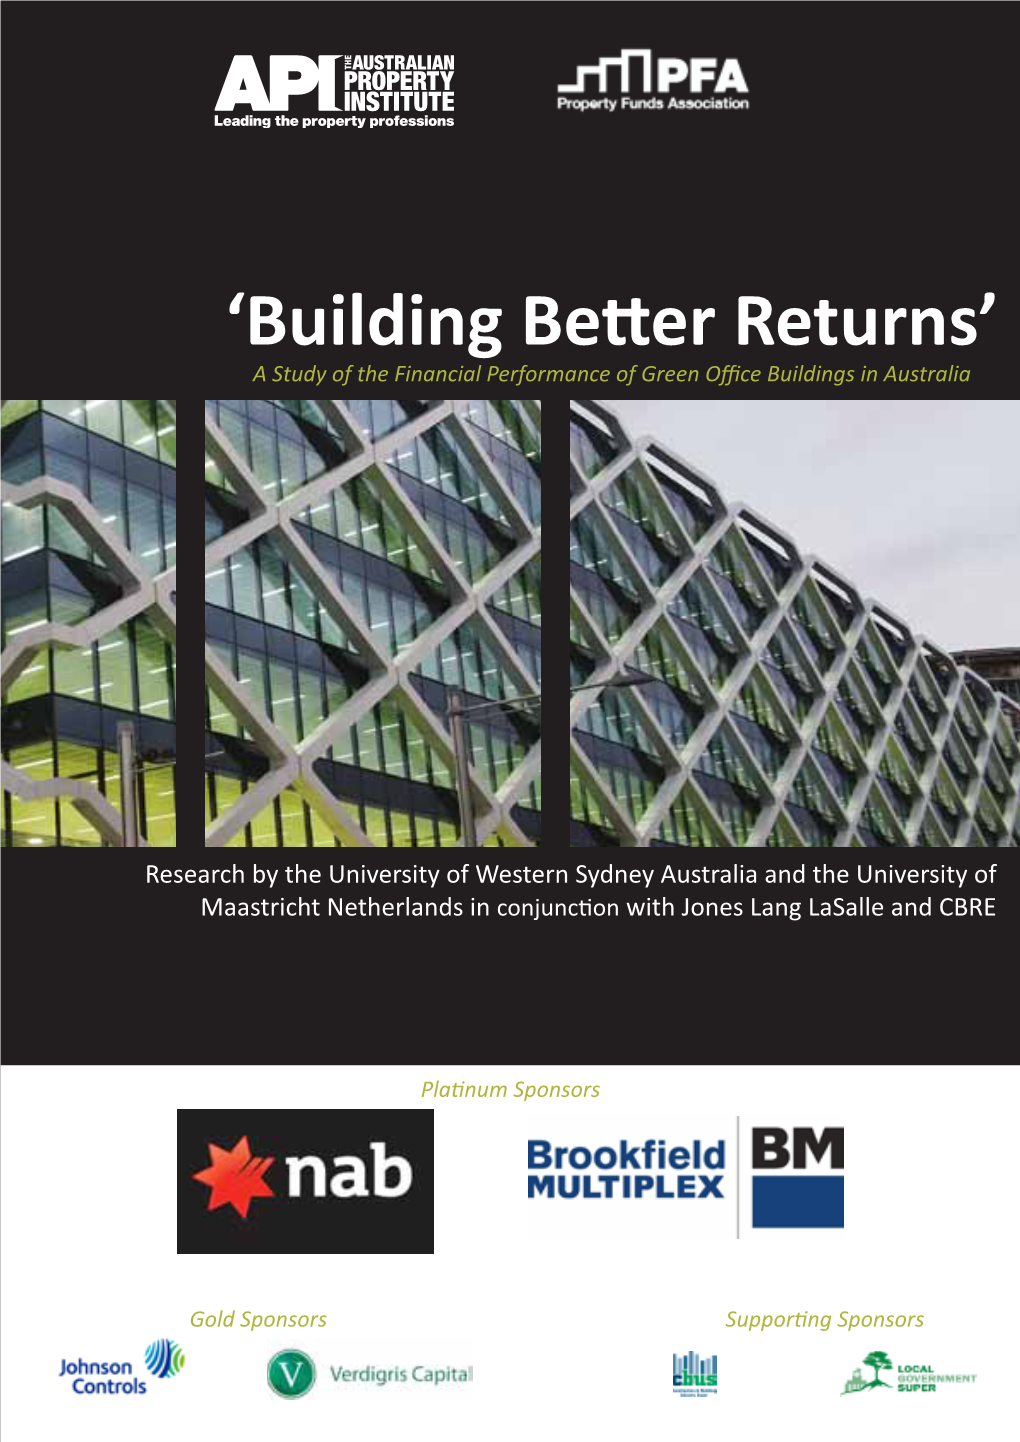 “Building Better Returns” Research Report (“The Report”)